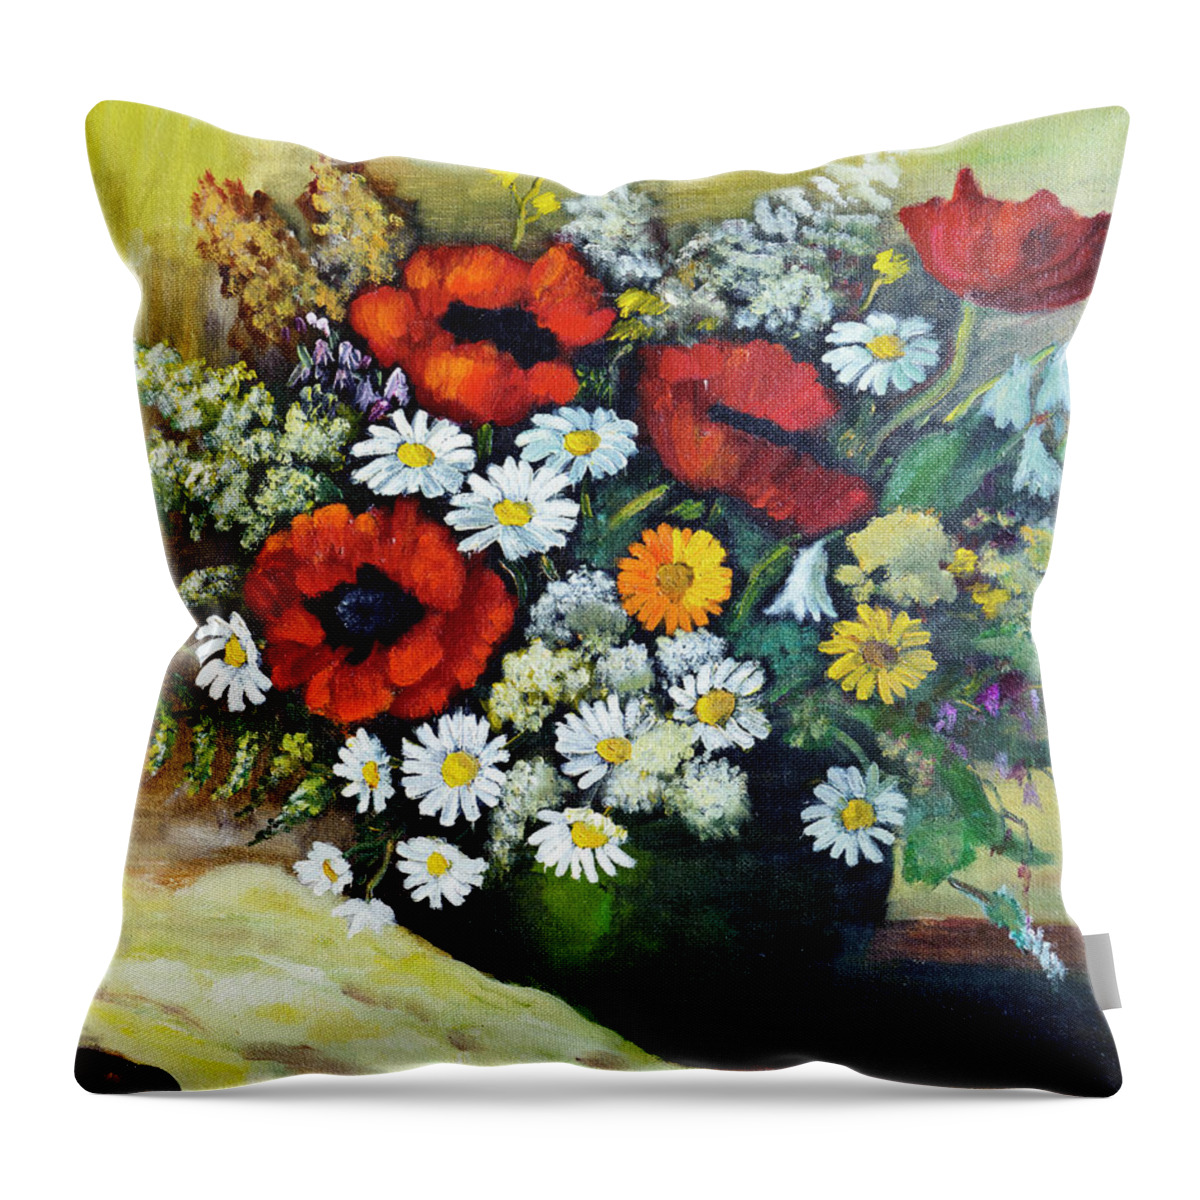 Art Throw Pillow featuring the digital art Composition Of Flowers #9 by Balticboy